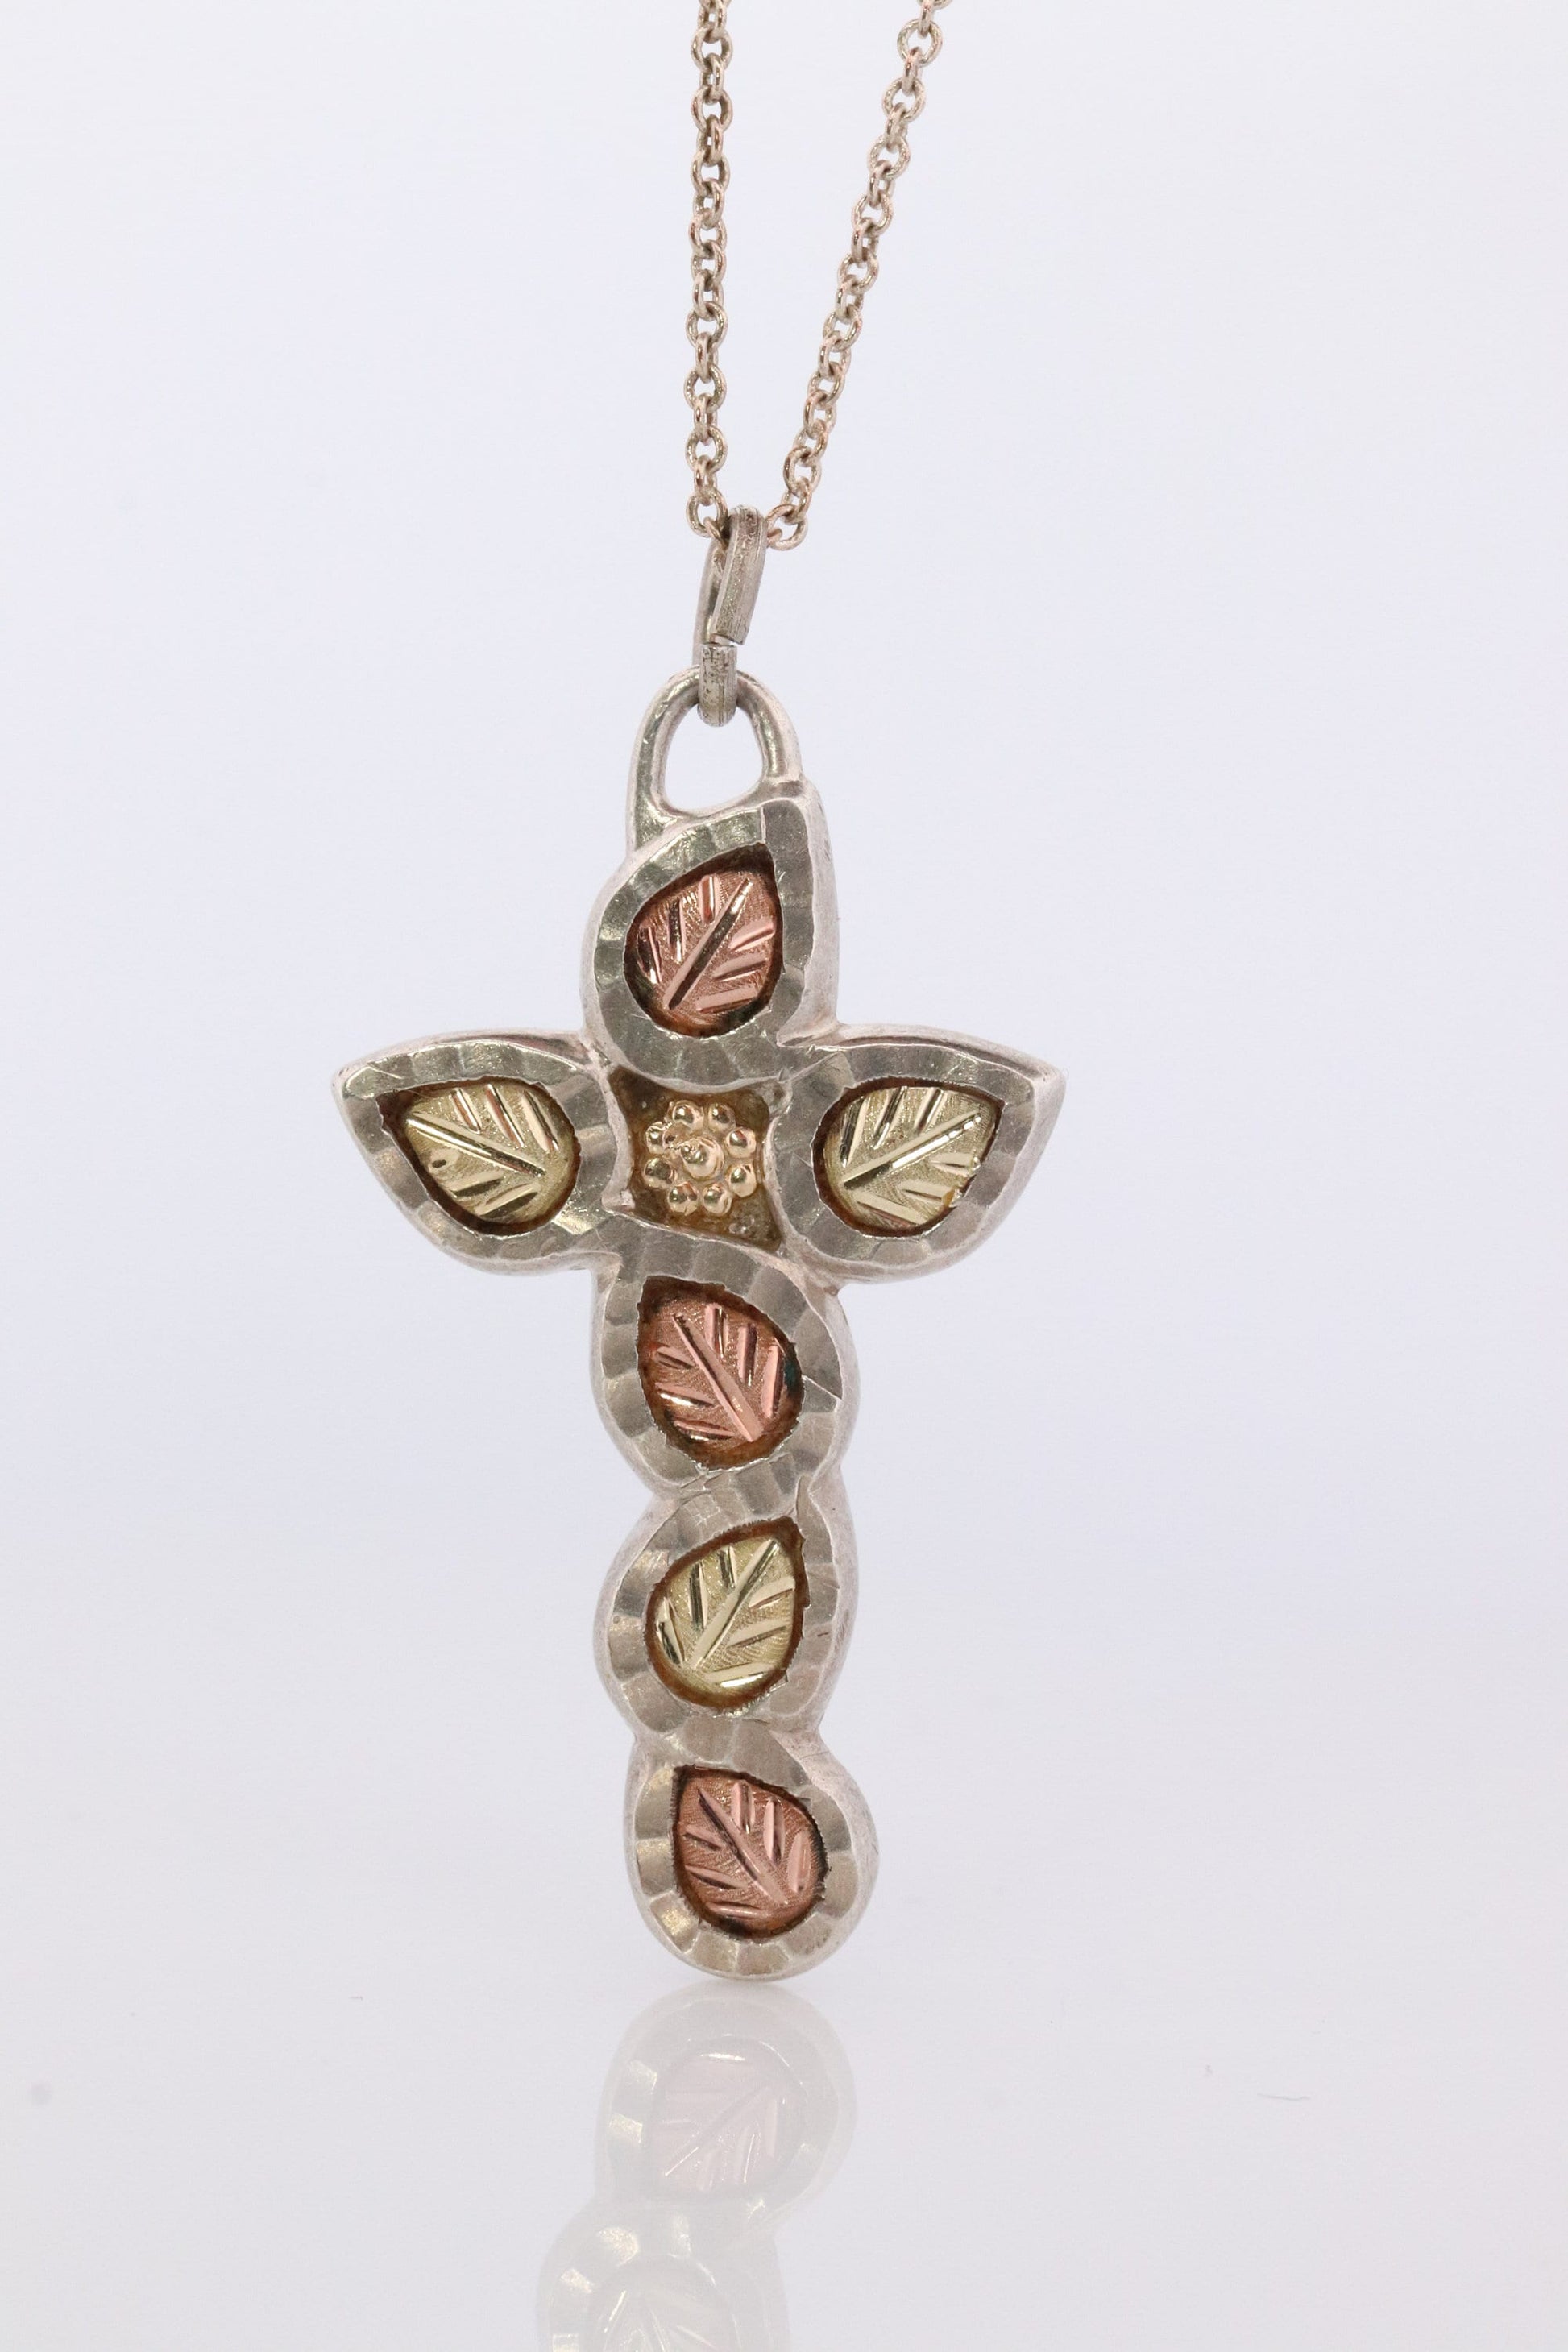 Black Hills Gold Cross Necklace. Sterling Silver with 10k/12k multi tone Black Hills Gold Crucifix Pendant.